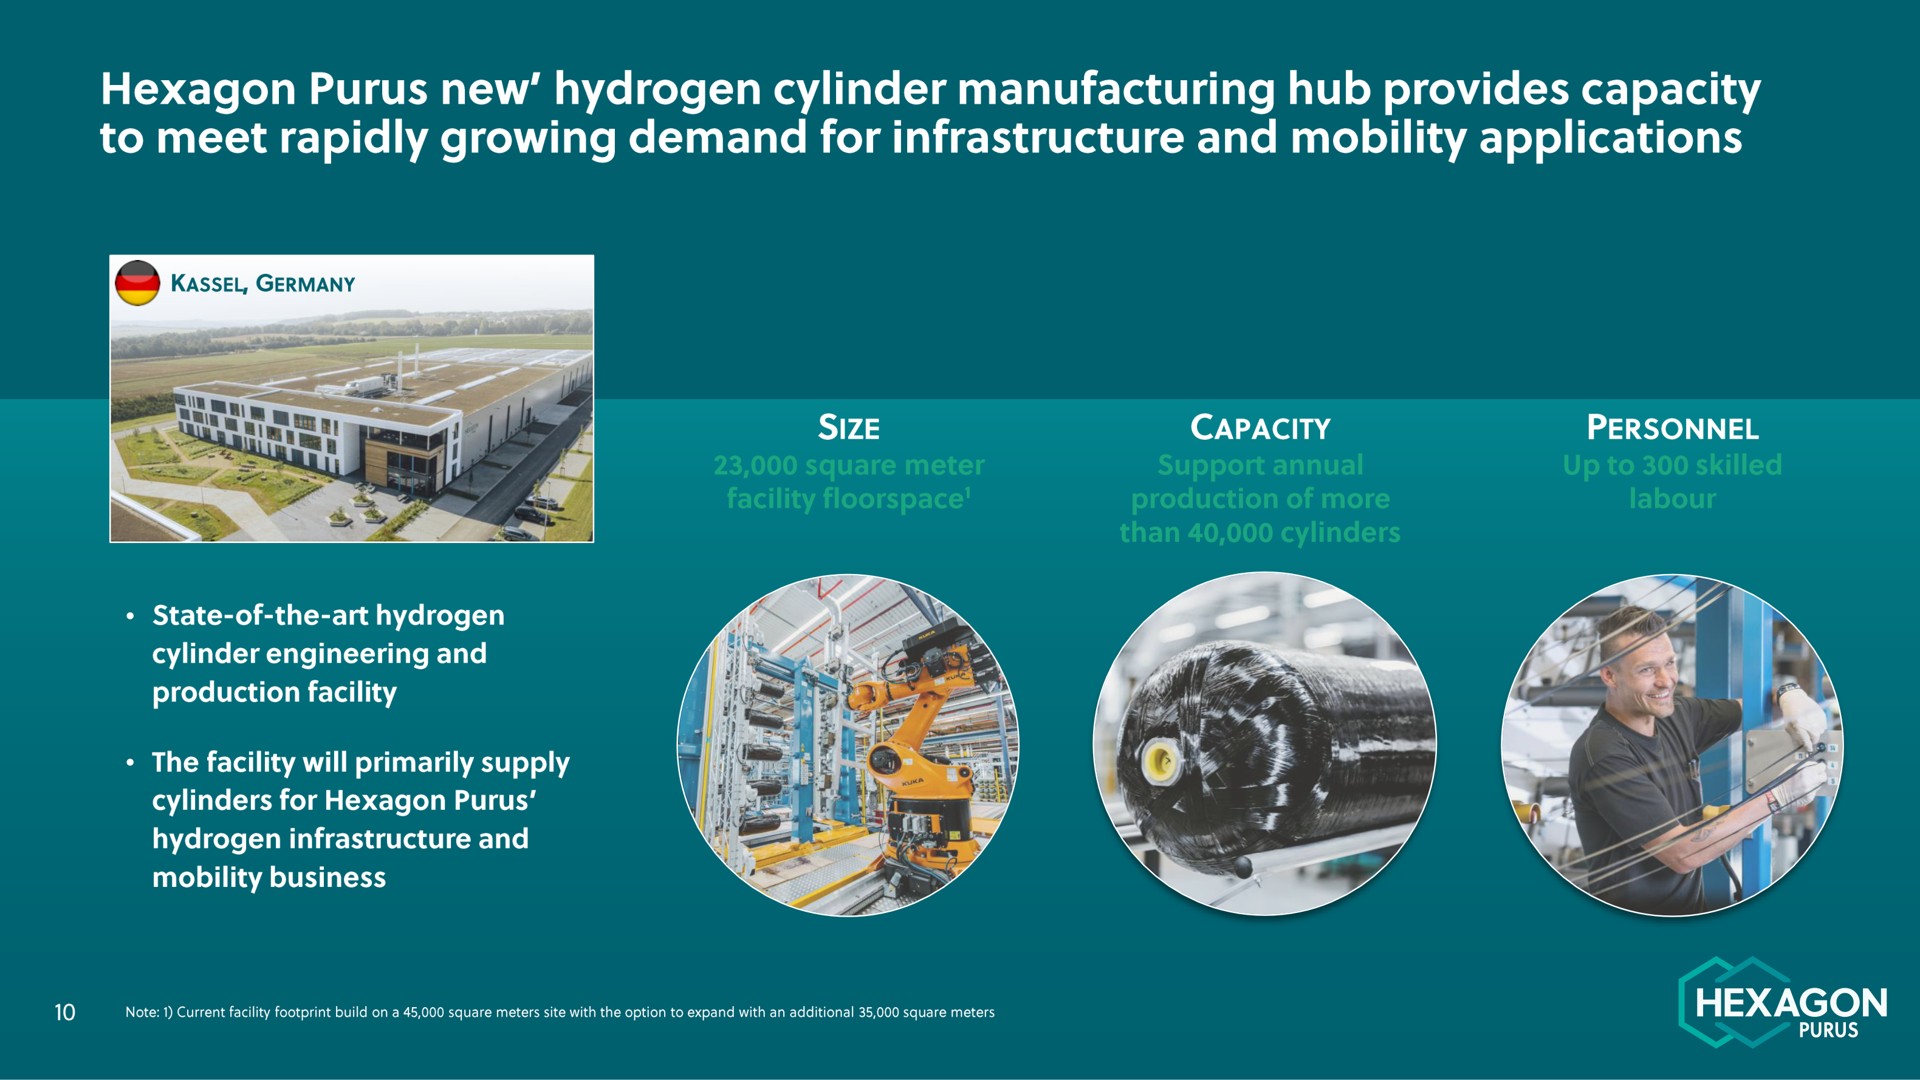 hexagon new hydrogen cylinder manufacturing hub provides capacity to meet rapidly growing demand for infrastructure and mobility applications | Hexagon Purus